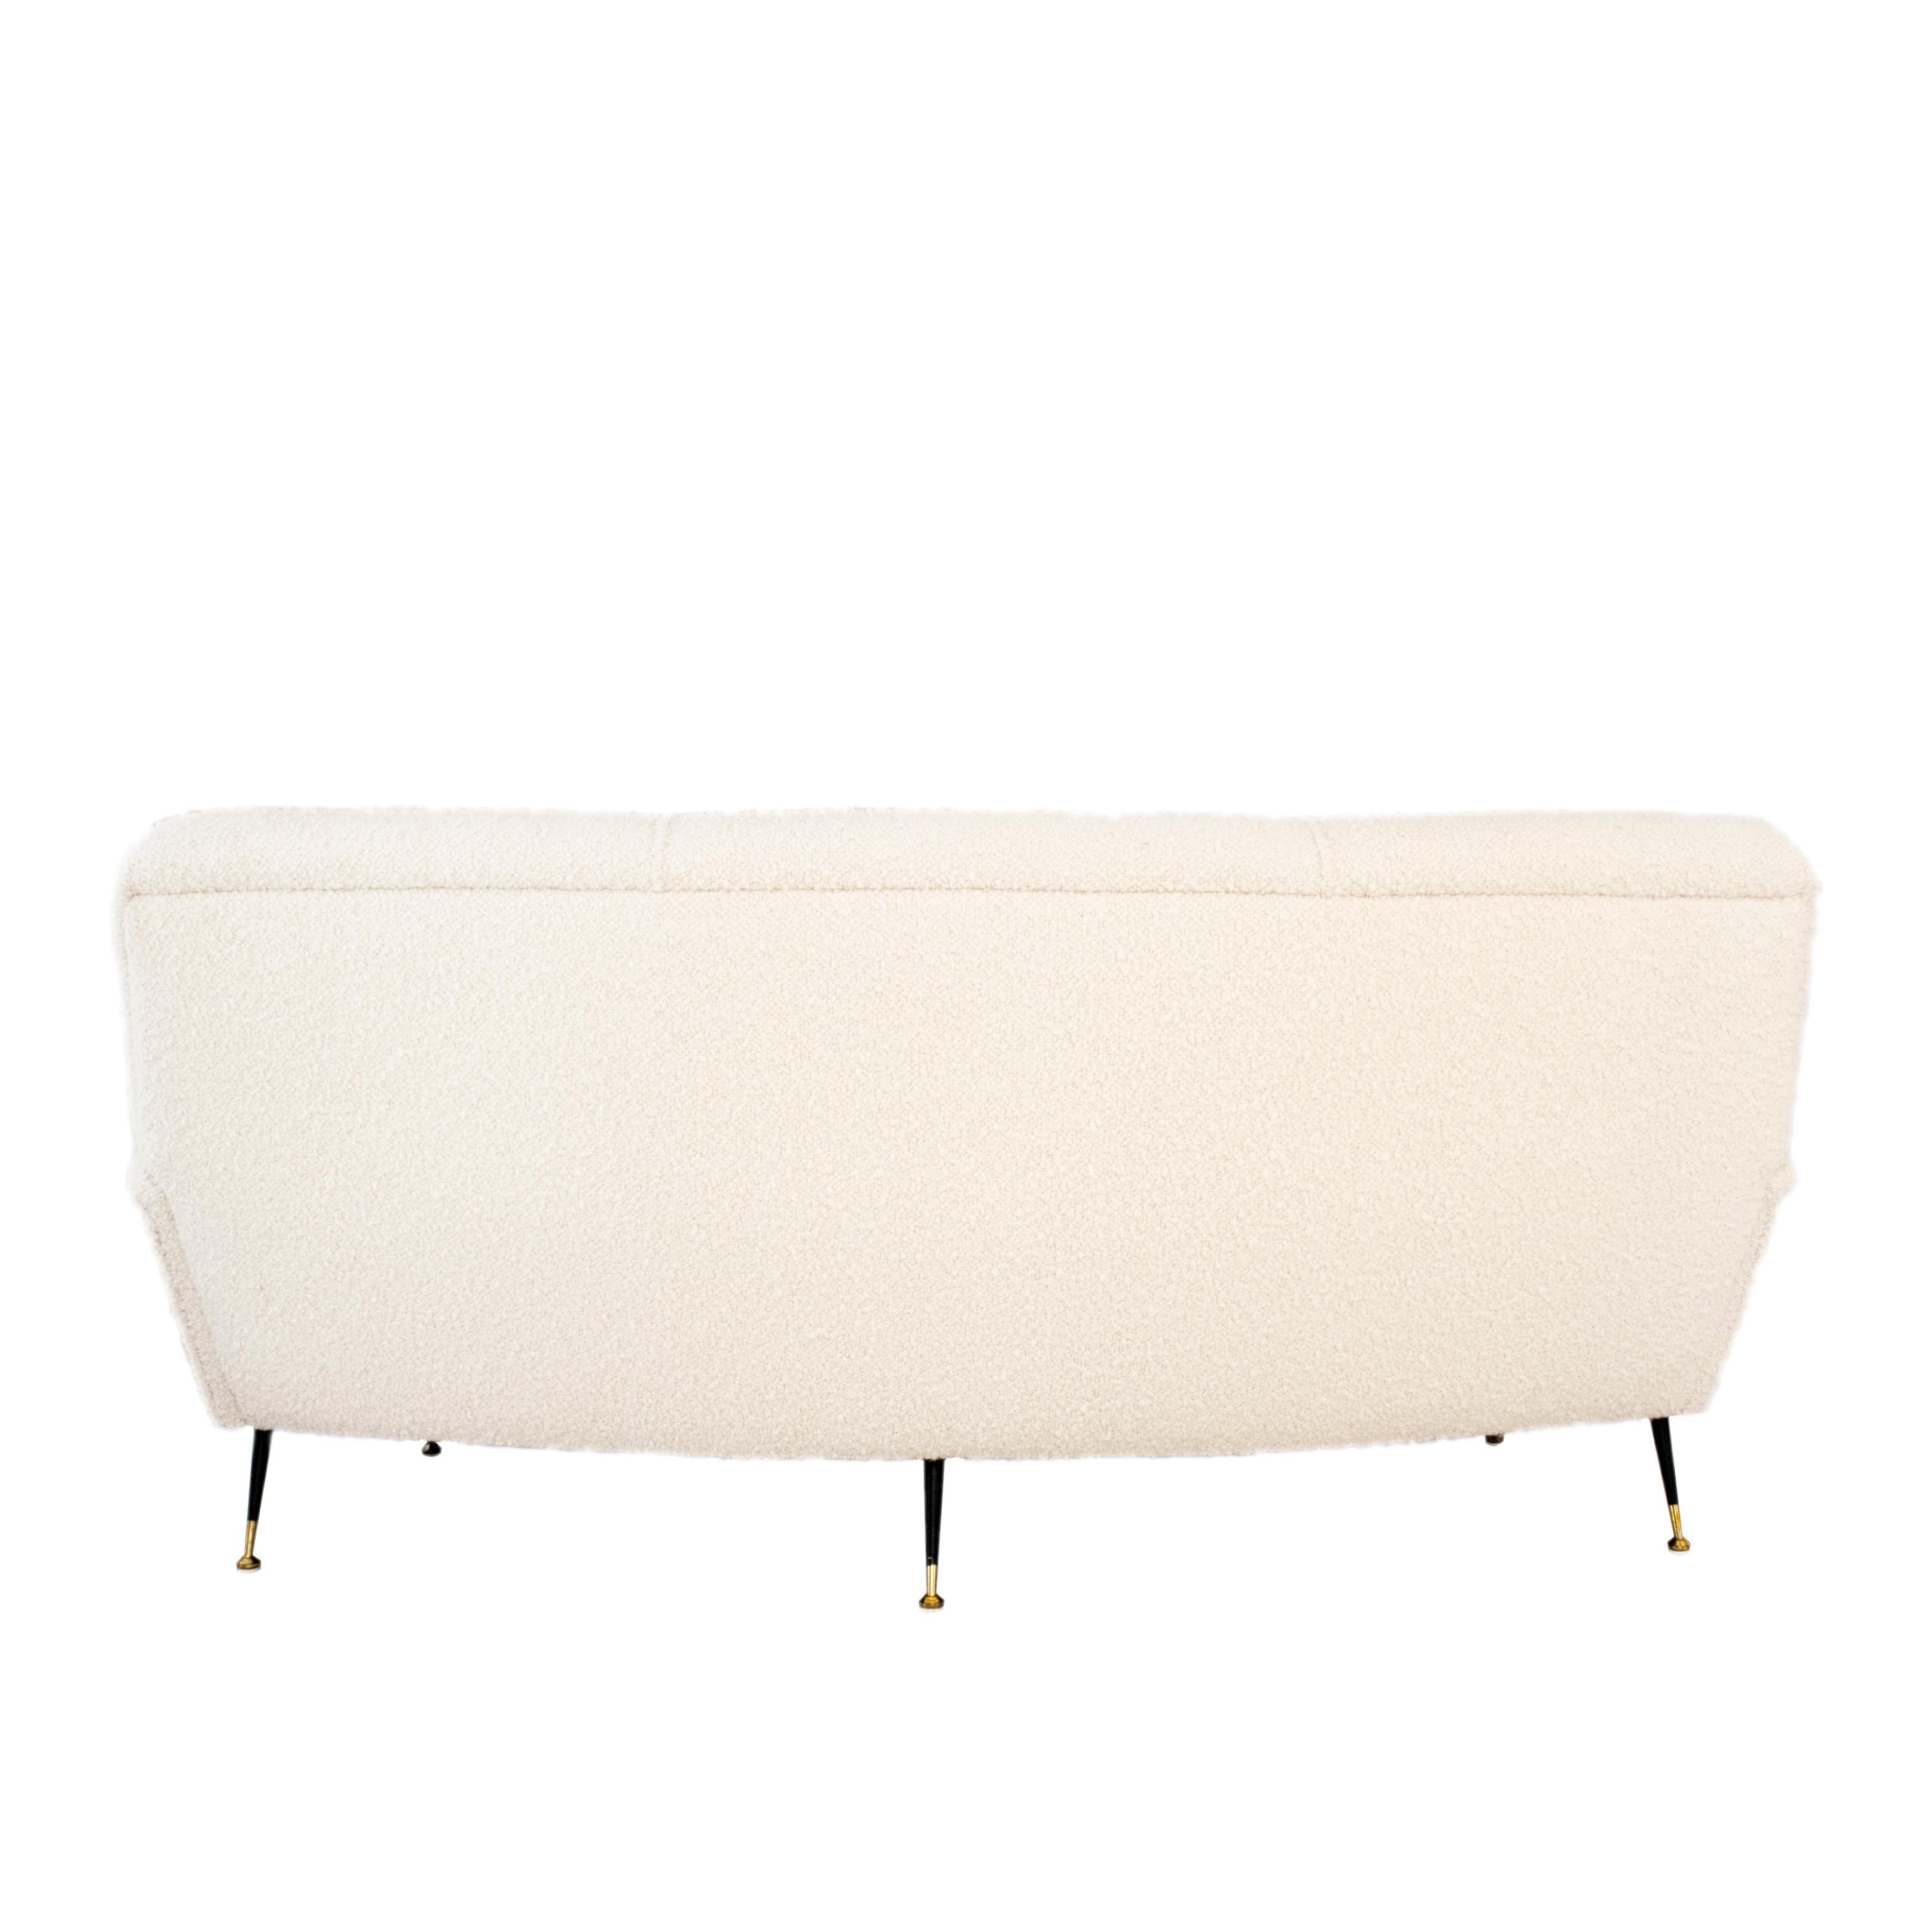 Italian Mid-Century White Boucle Curved Sofa with Five Legs, Italy, 1950 For Sale